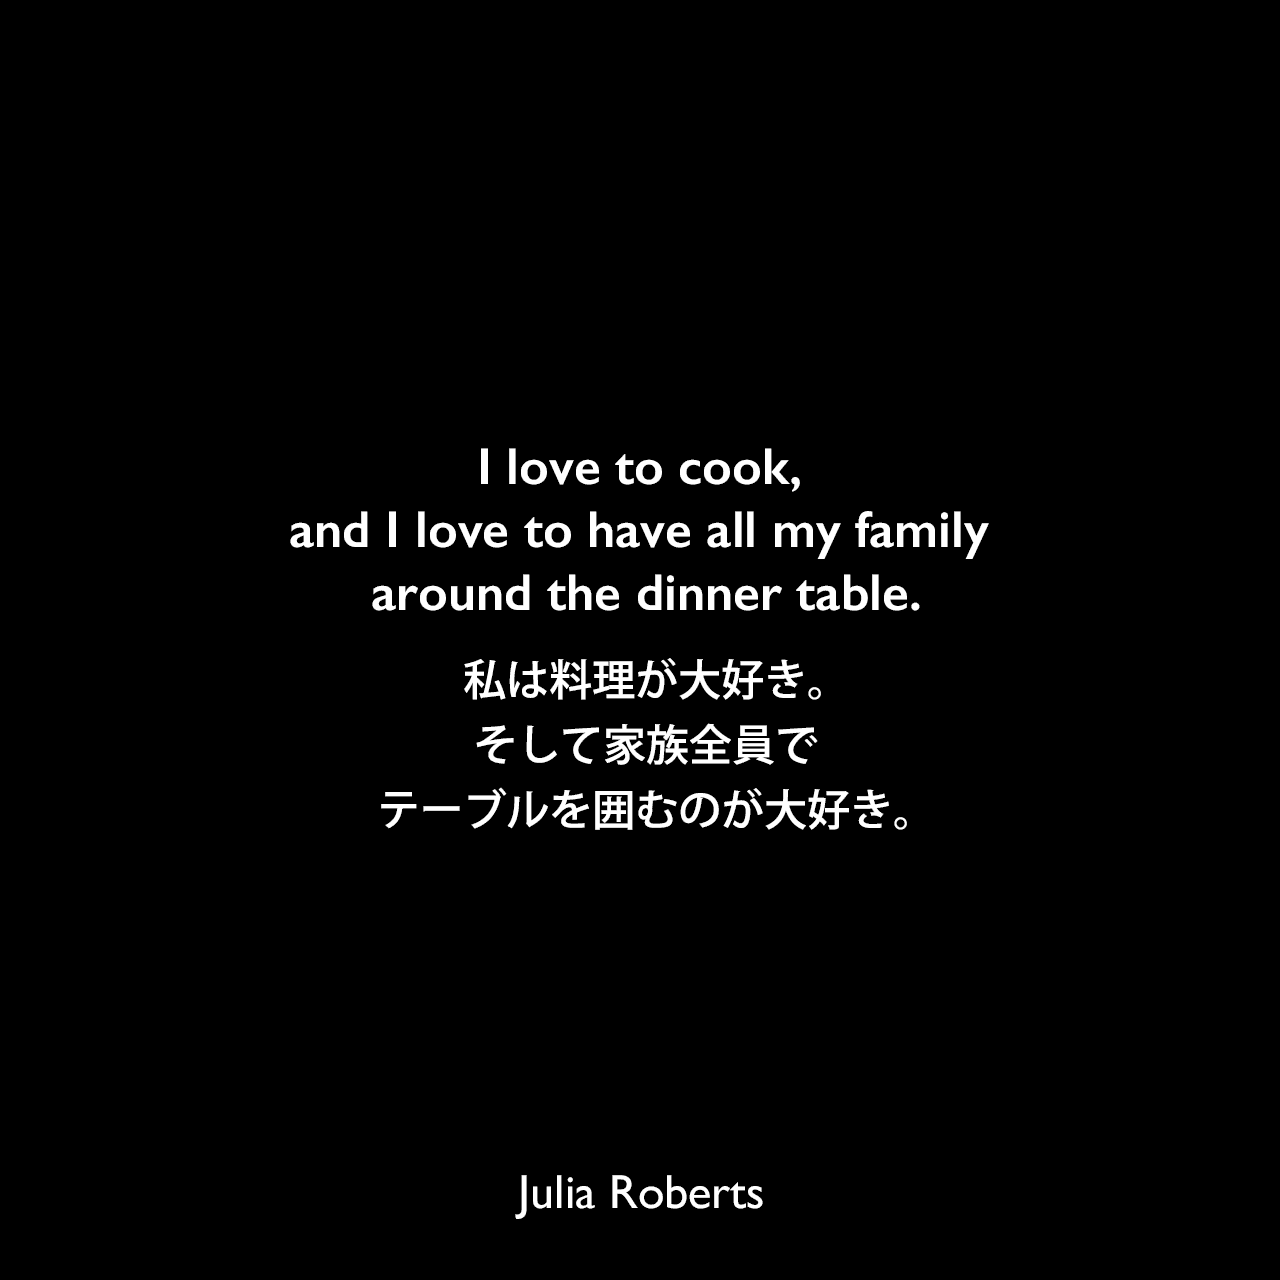 I love to cook, and I love to have all my family around the dinner table.私は料理が大好き。そして家族全員でテーブルを囲むのが大好き。Julia Roberts